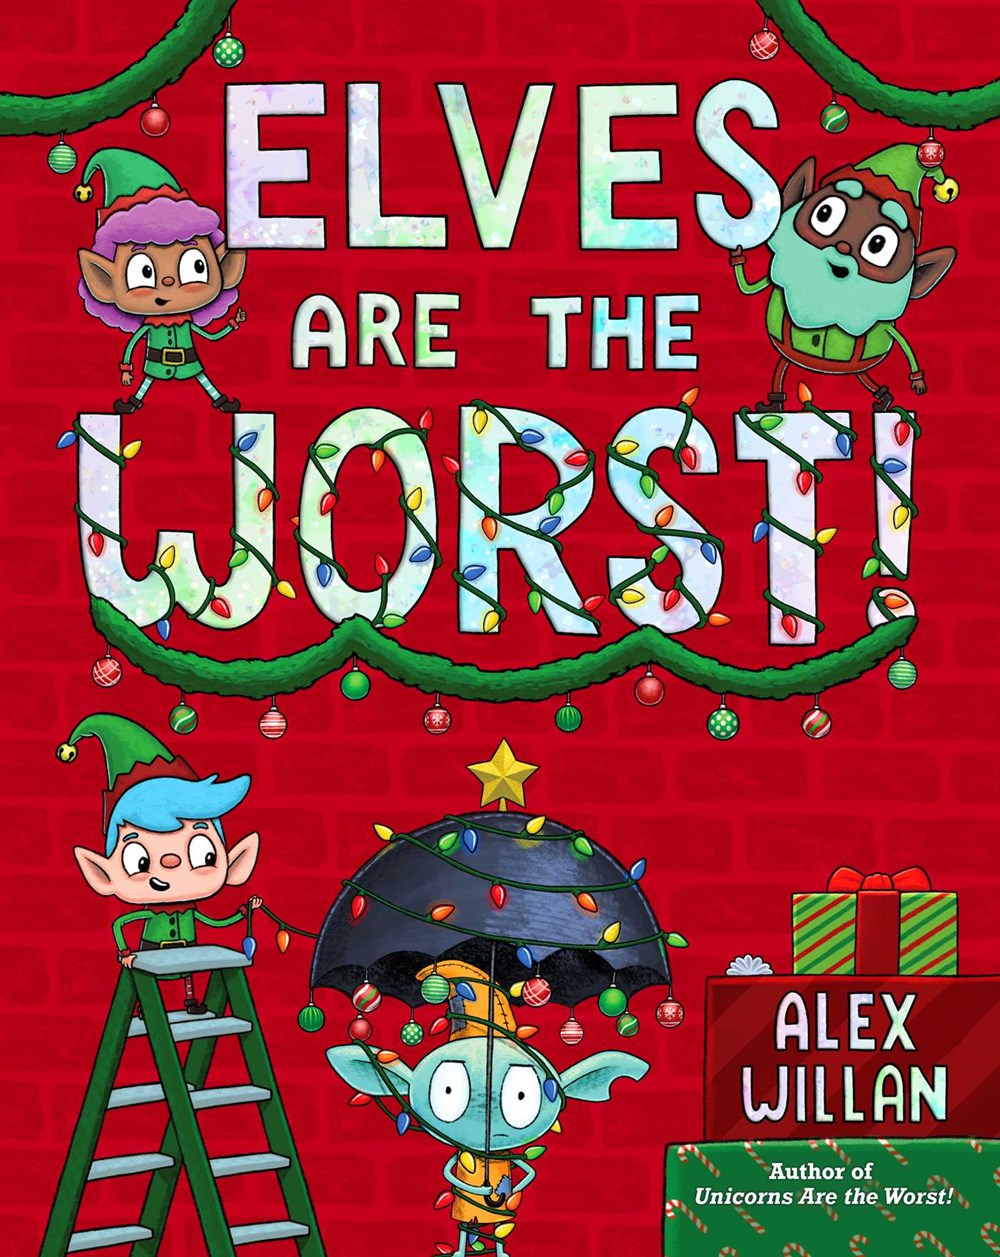 Elves are the Worst by Alex Willan